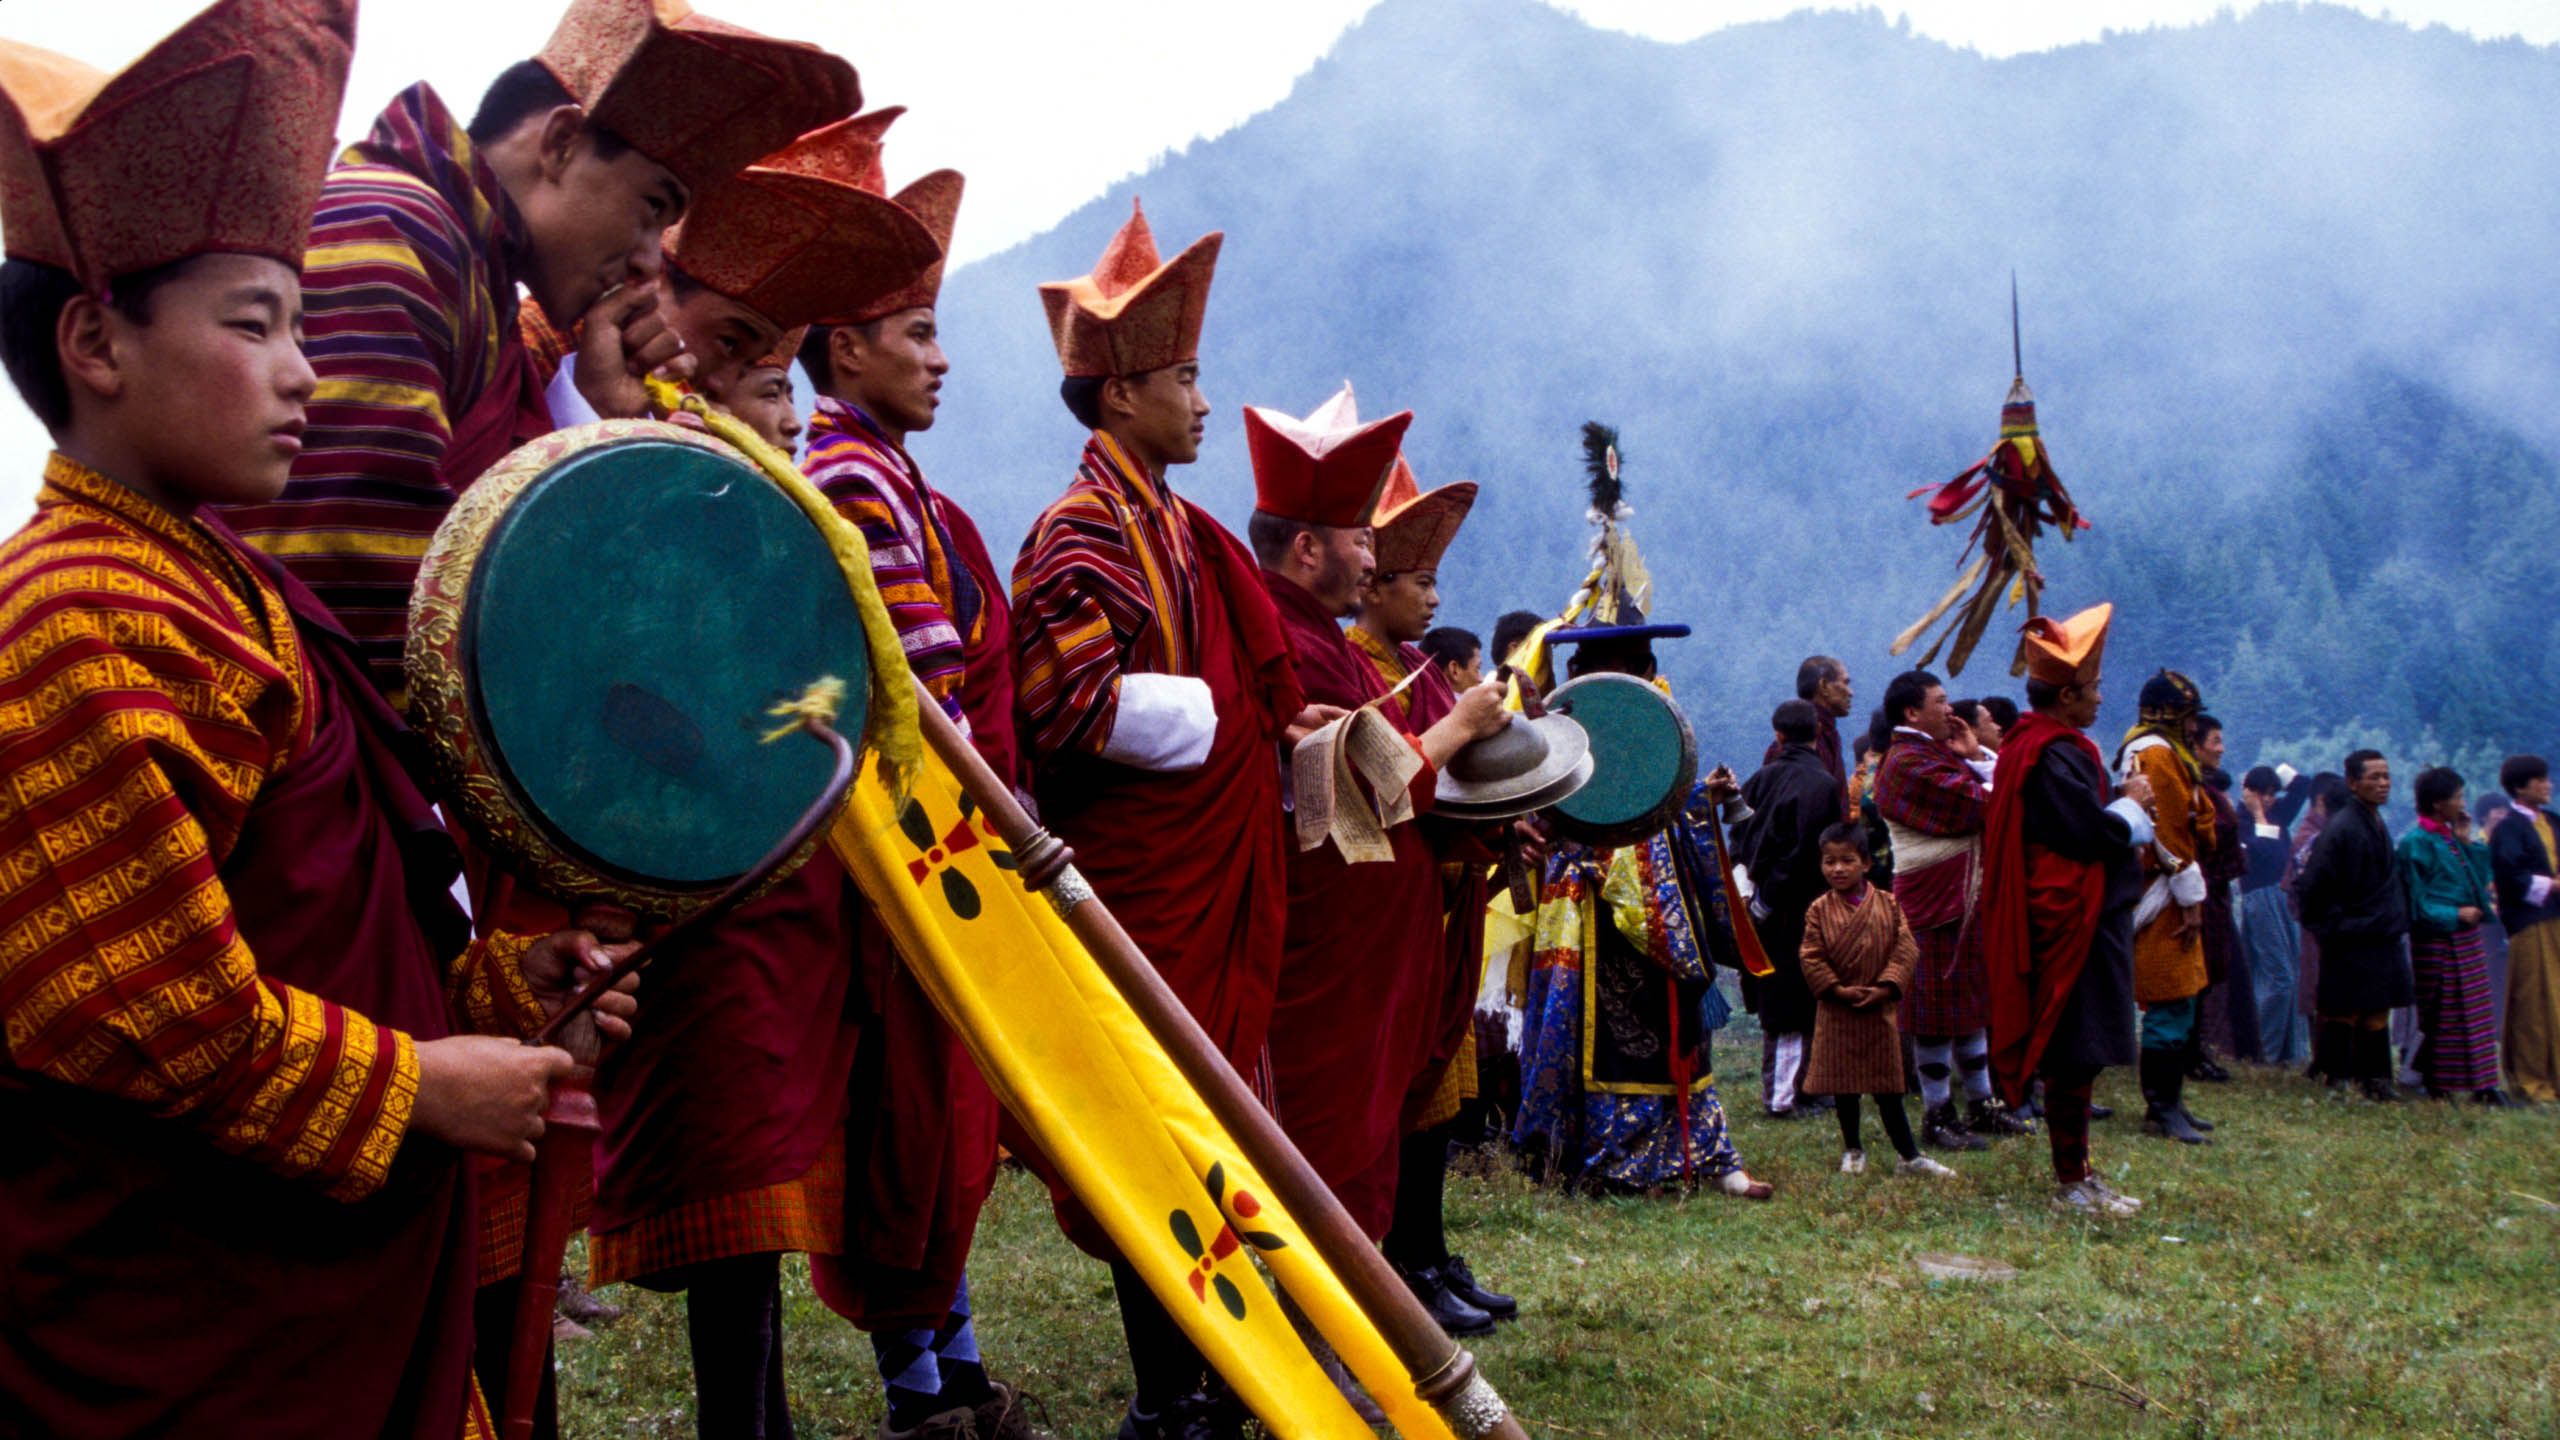 Bhutan festival performers with instruments